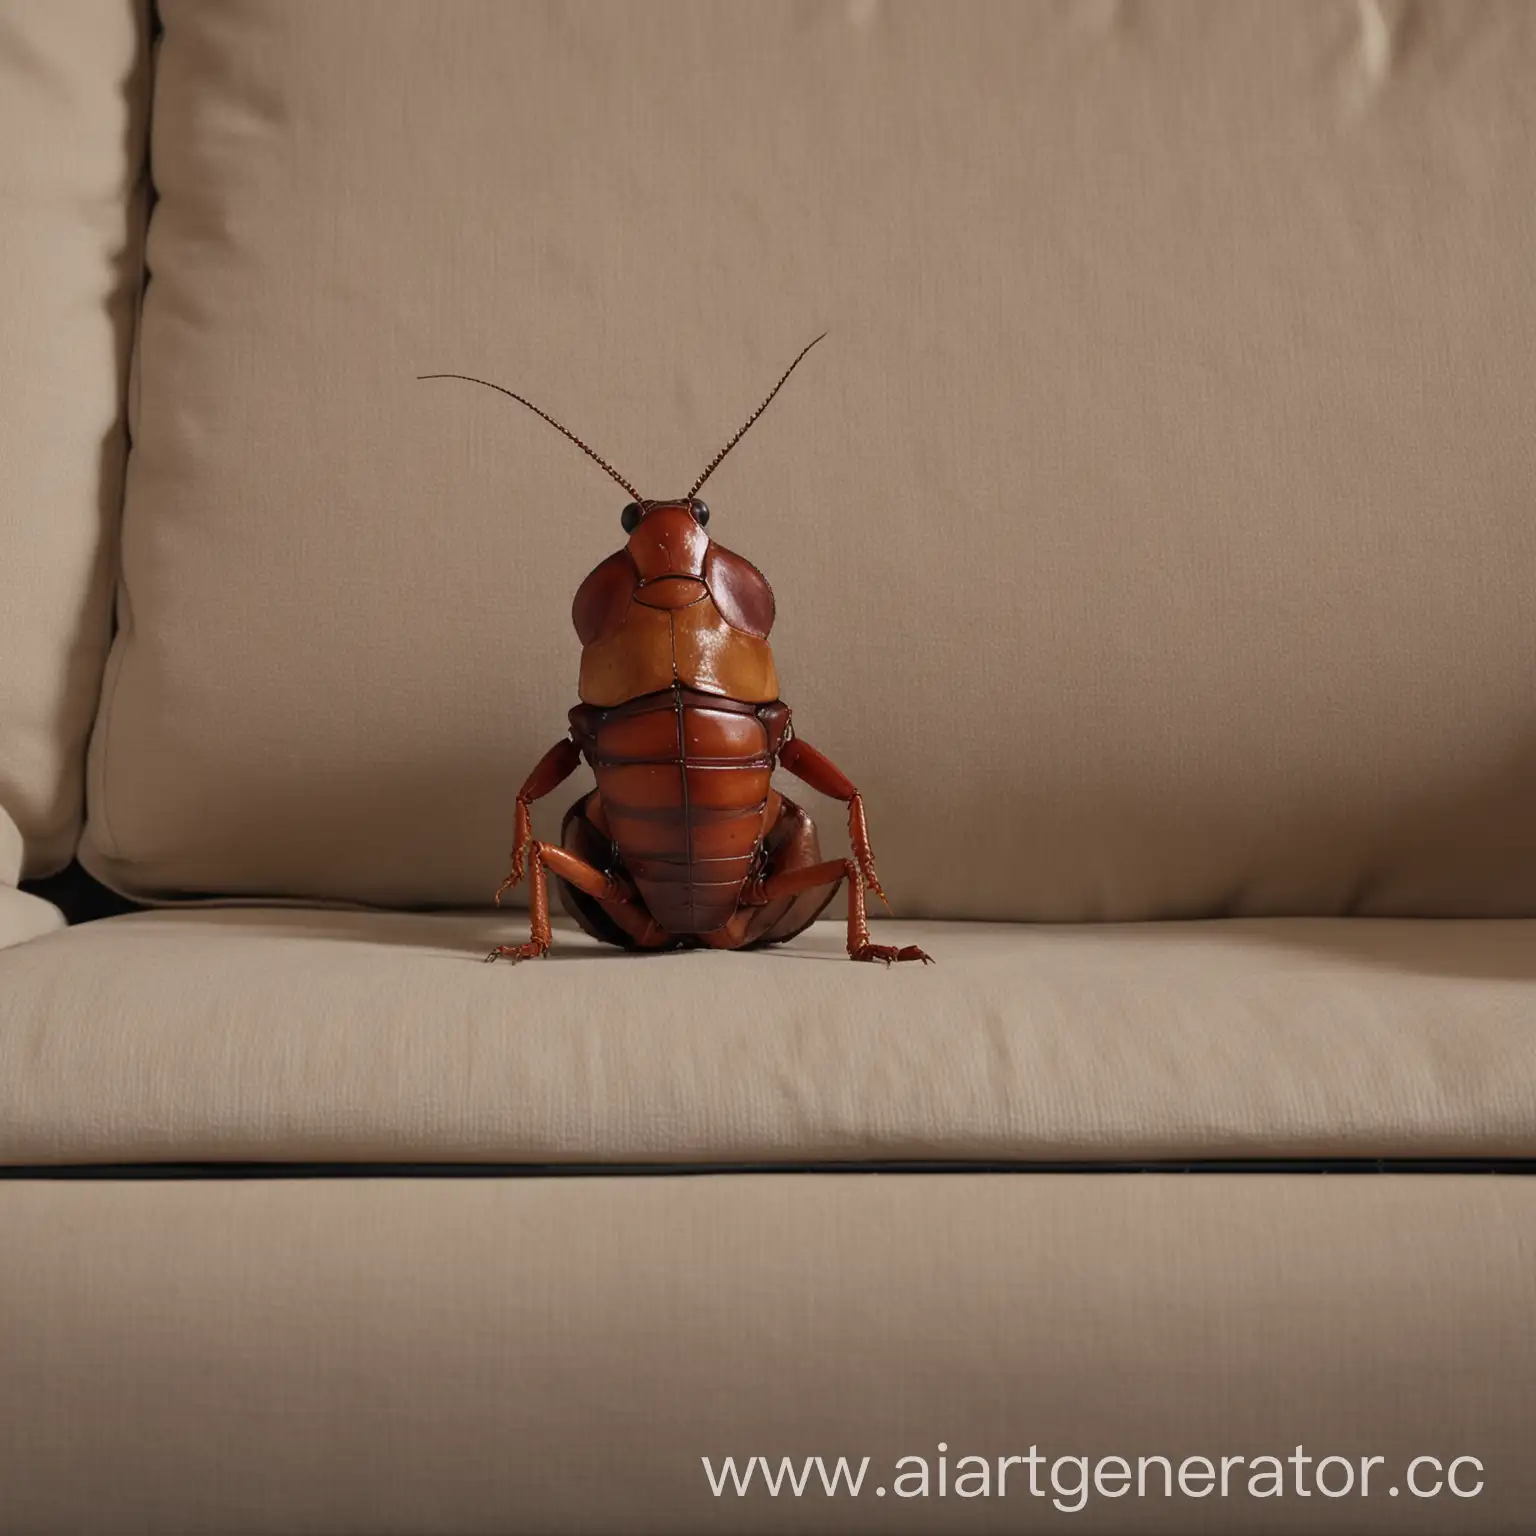 Relaxing-Cockroach-Watching-TV-in-Slippers-and-Underpants-Realistic-4K-Illustration